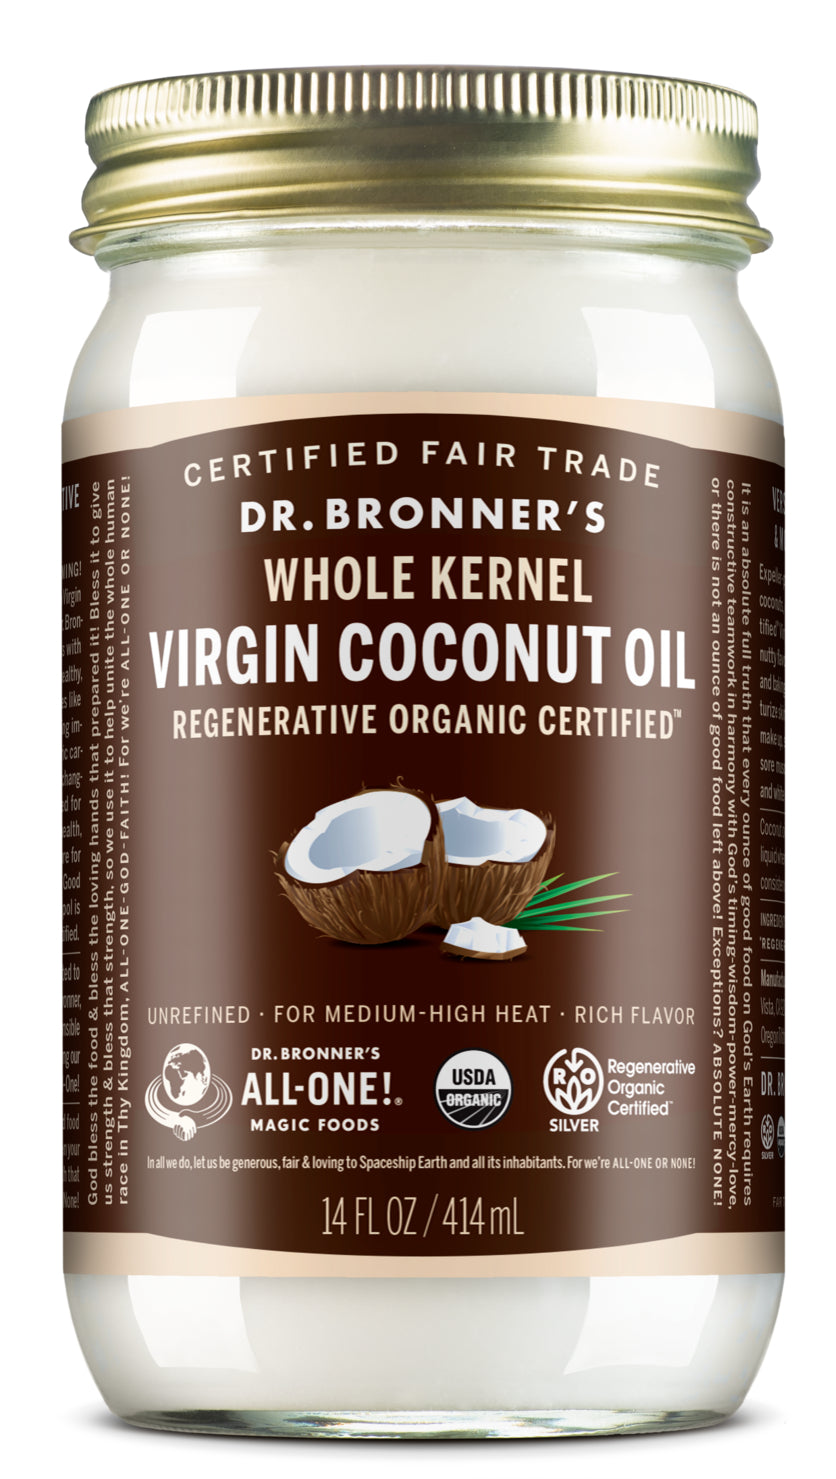 Dr. Bronner's - Organic Virgin Coconut Oil (Whole Kernel, 30 Ounce) - Coconut Oil for Cooking, Baking, Hair and Body, Unrefined and Fresh-Pressed, Rich and Nutty Flavor, Fair Trade, Vegan, Non-GMO Whole Kernel 30 Fl Oz (Pack of 1)